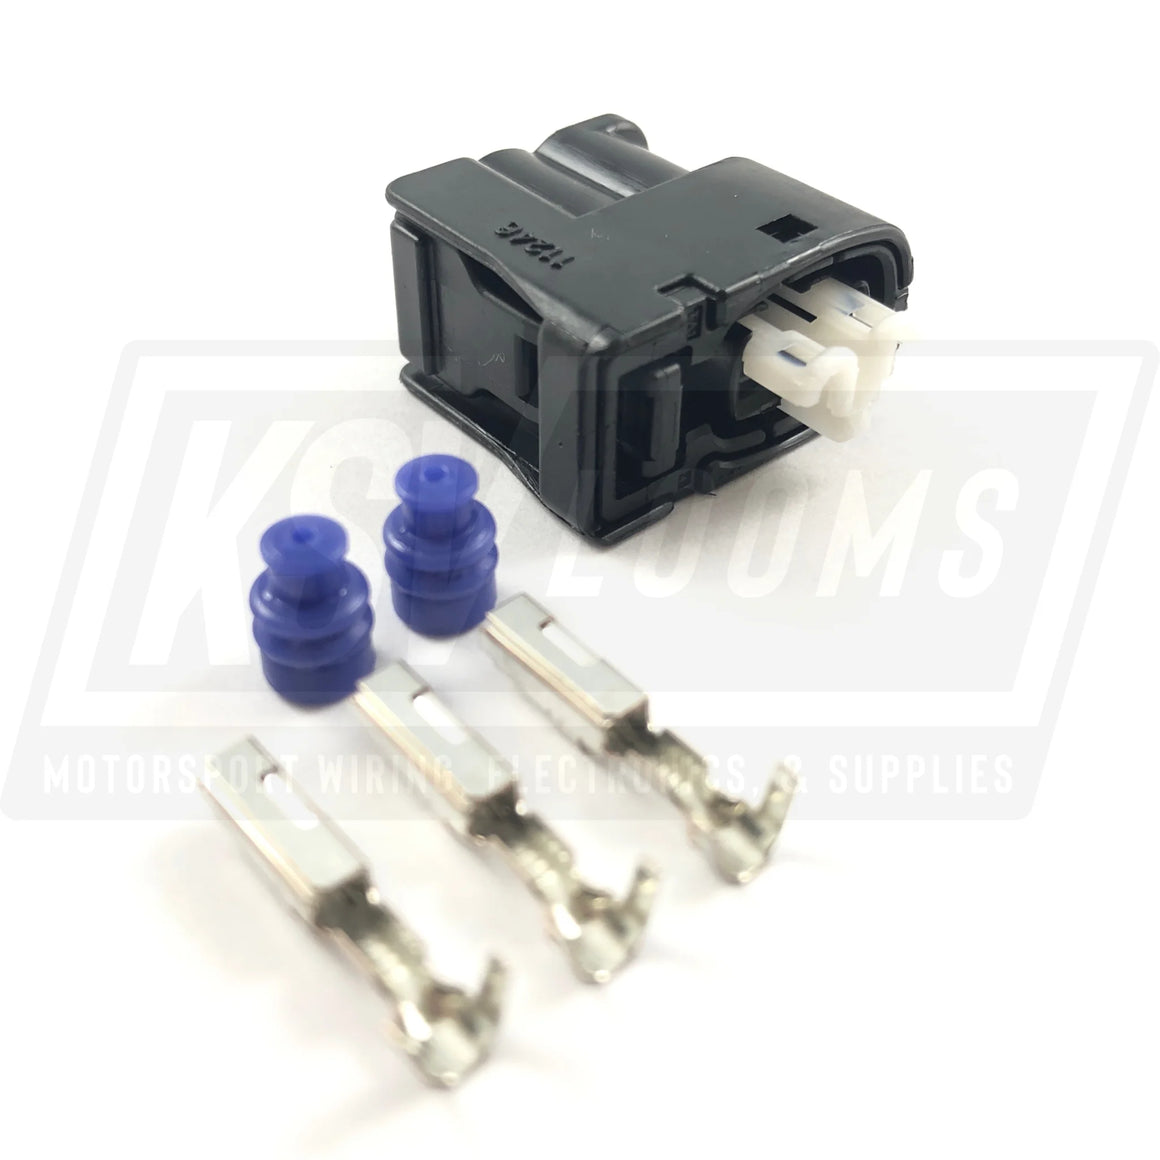 2-Way Connector Kit Same As Ford Wpt-1094 (22-20 Awg)